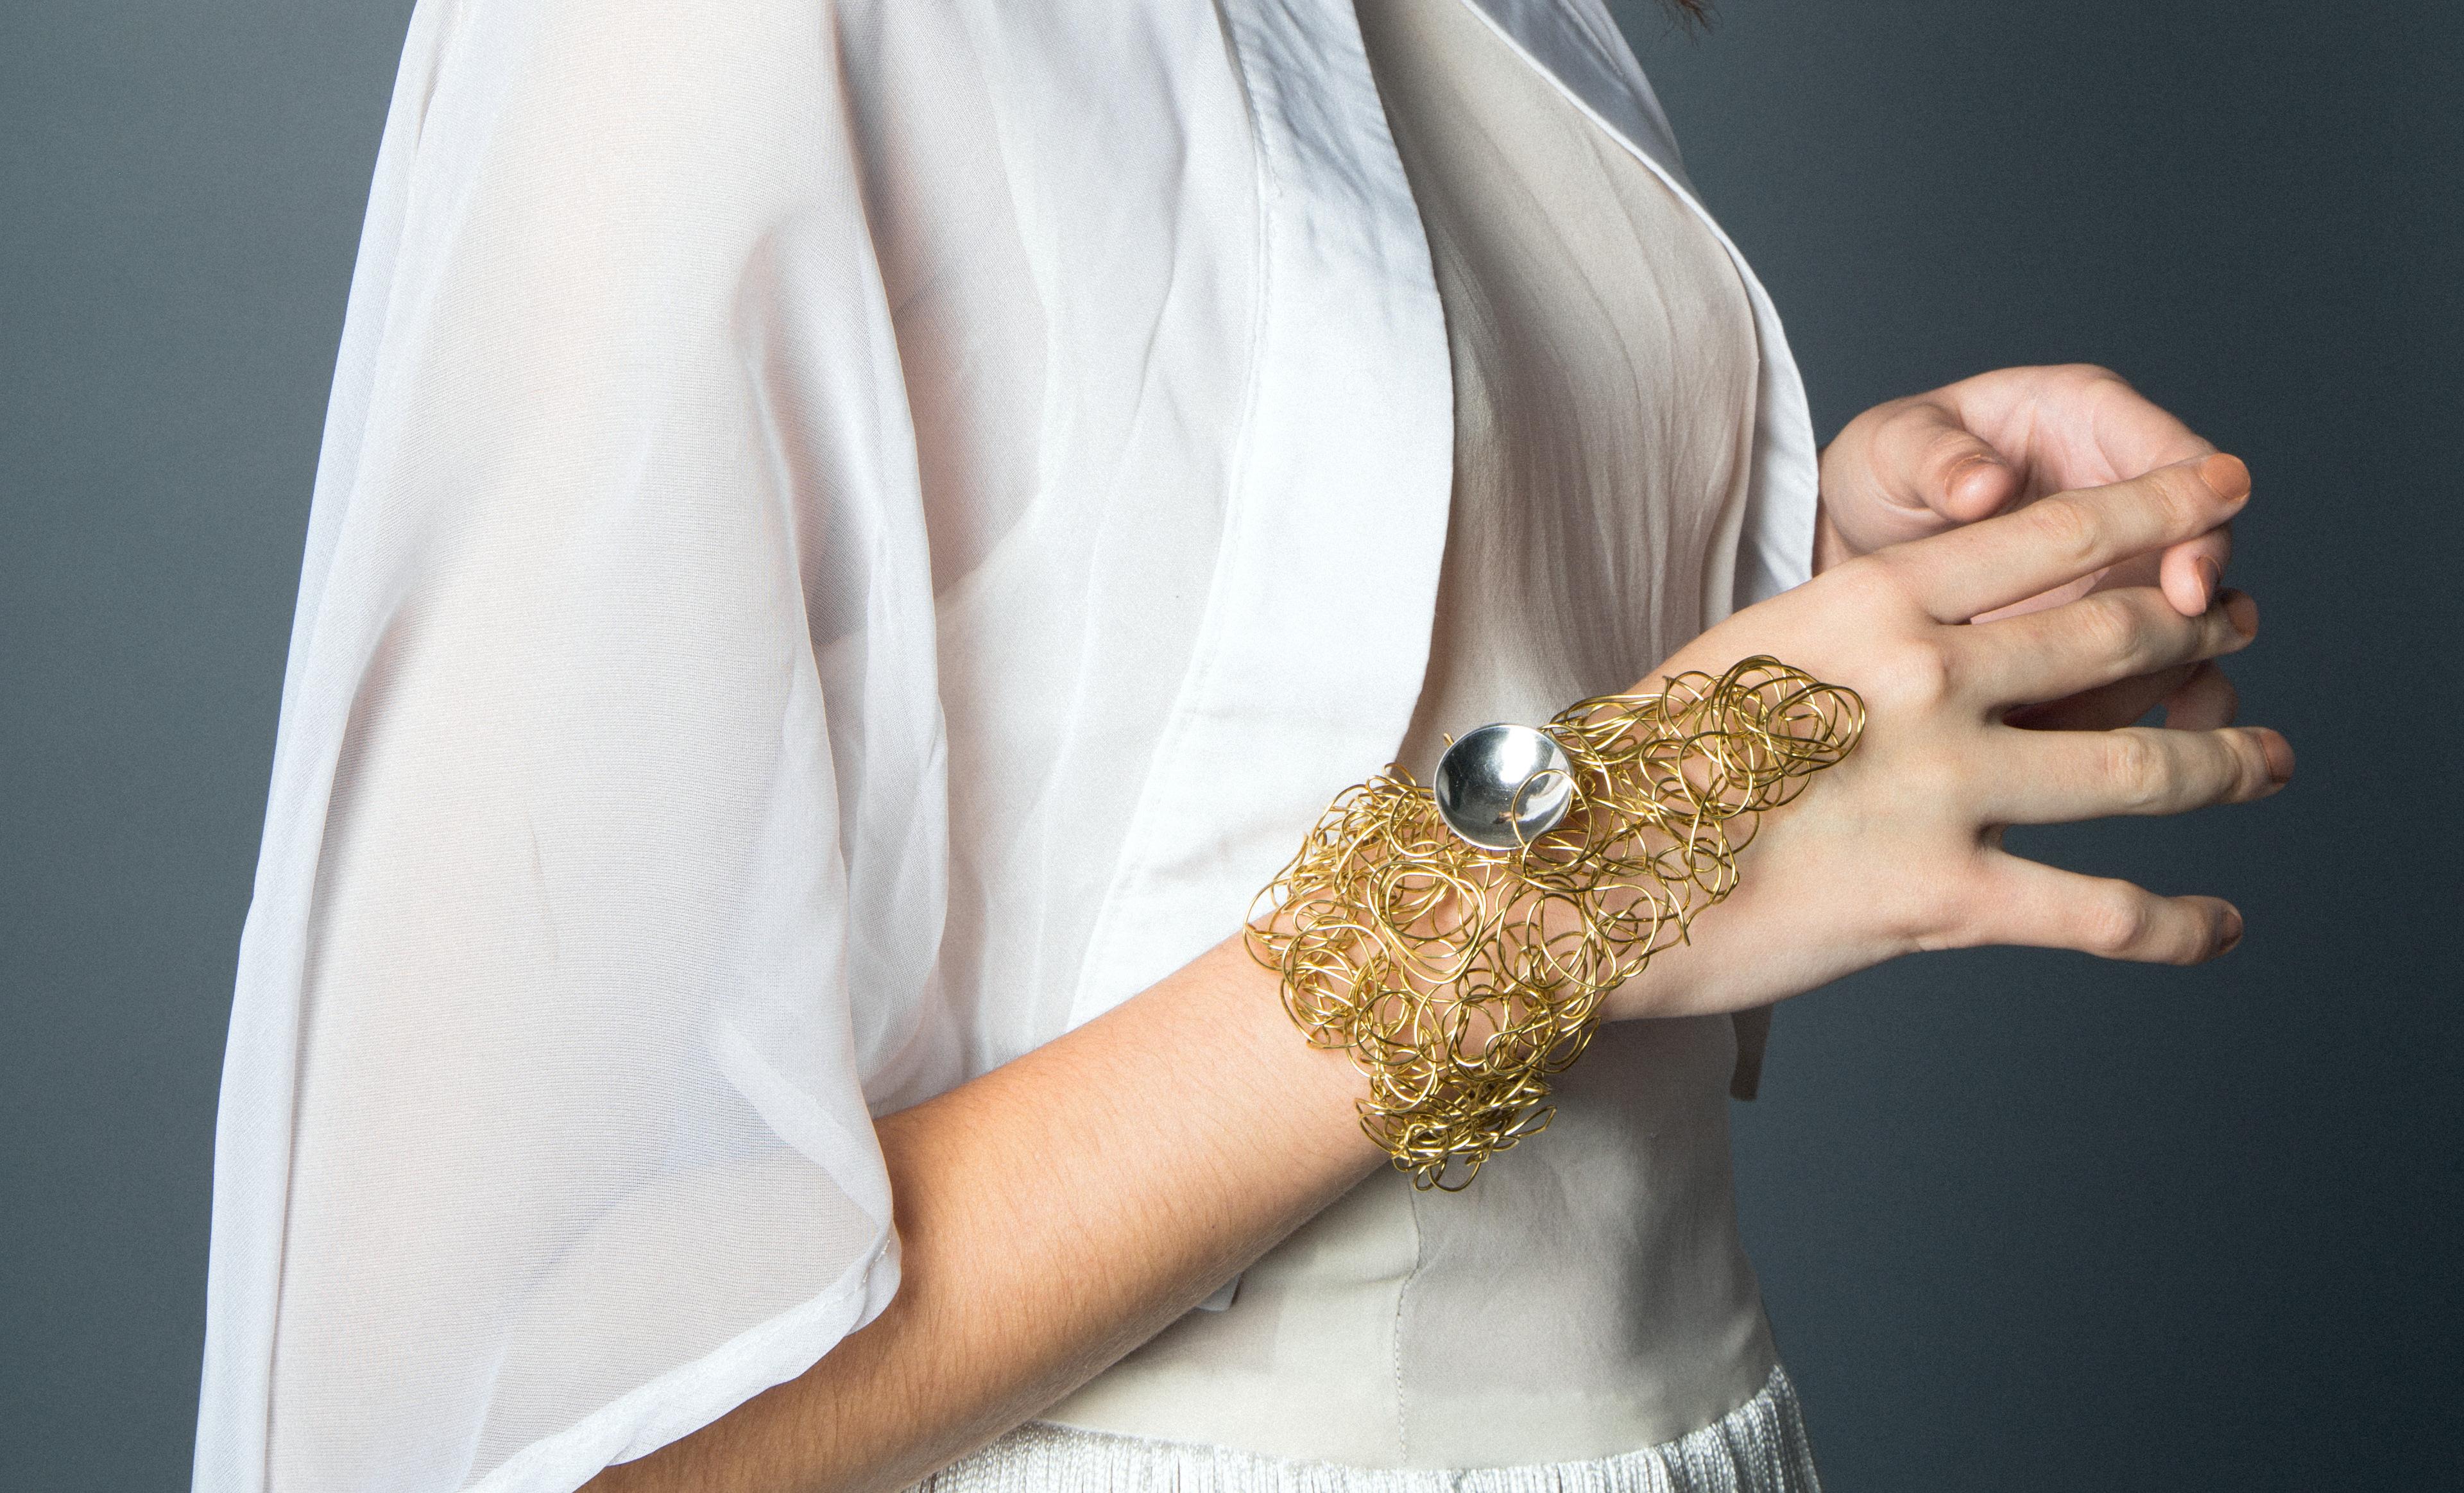 A very sexy cuff for daring women. You will get the attention you are craving when wearing this daring handcrafted piece. This cuff definitely finishes off and personalizes any outfit you choose to wear it with. The cuff is made of wired brass and